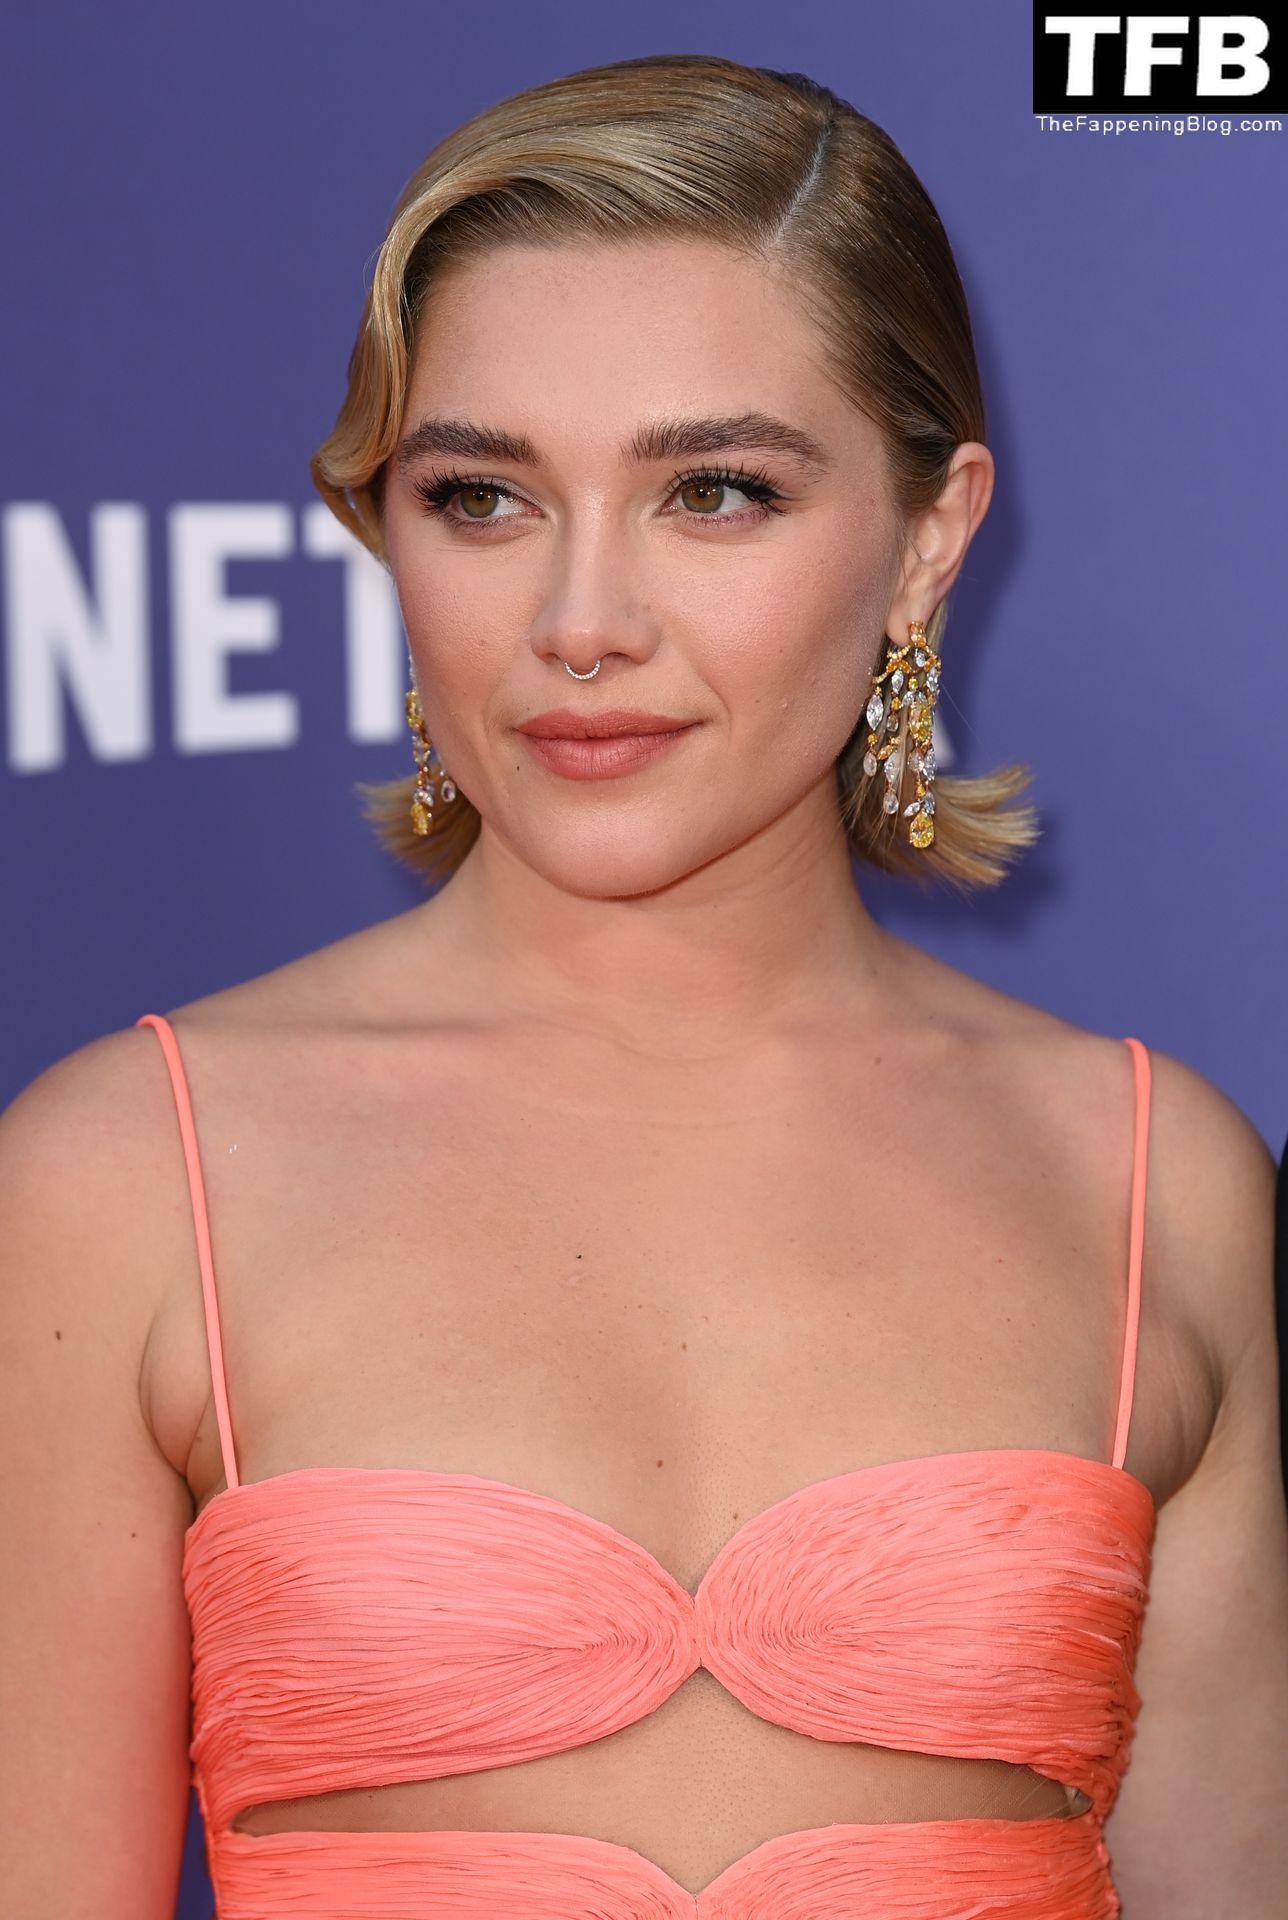 Florence-Pugh-Sexy-The-Fappening-Blog-45-1.jpg